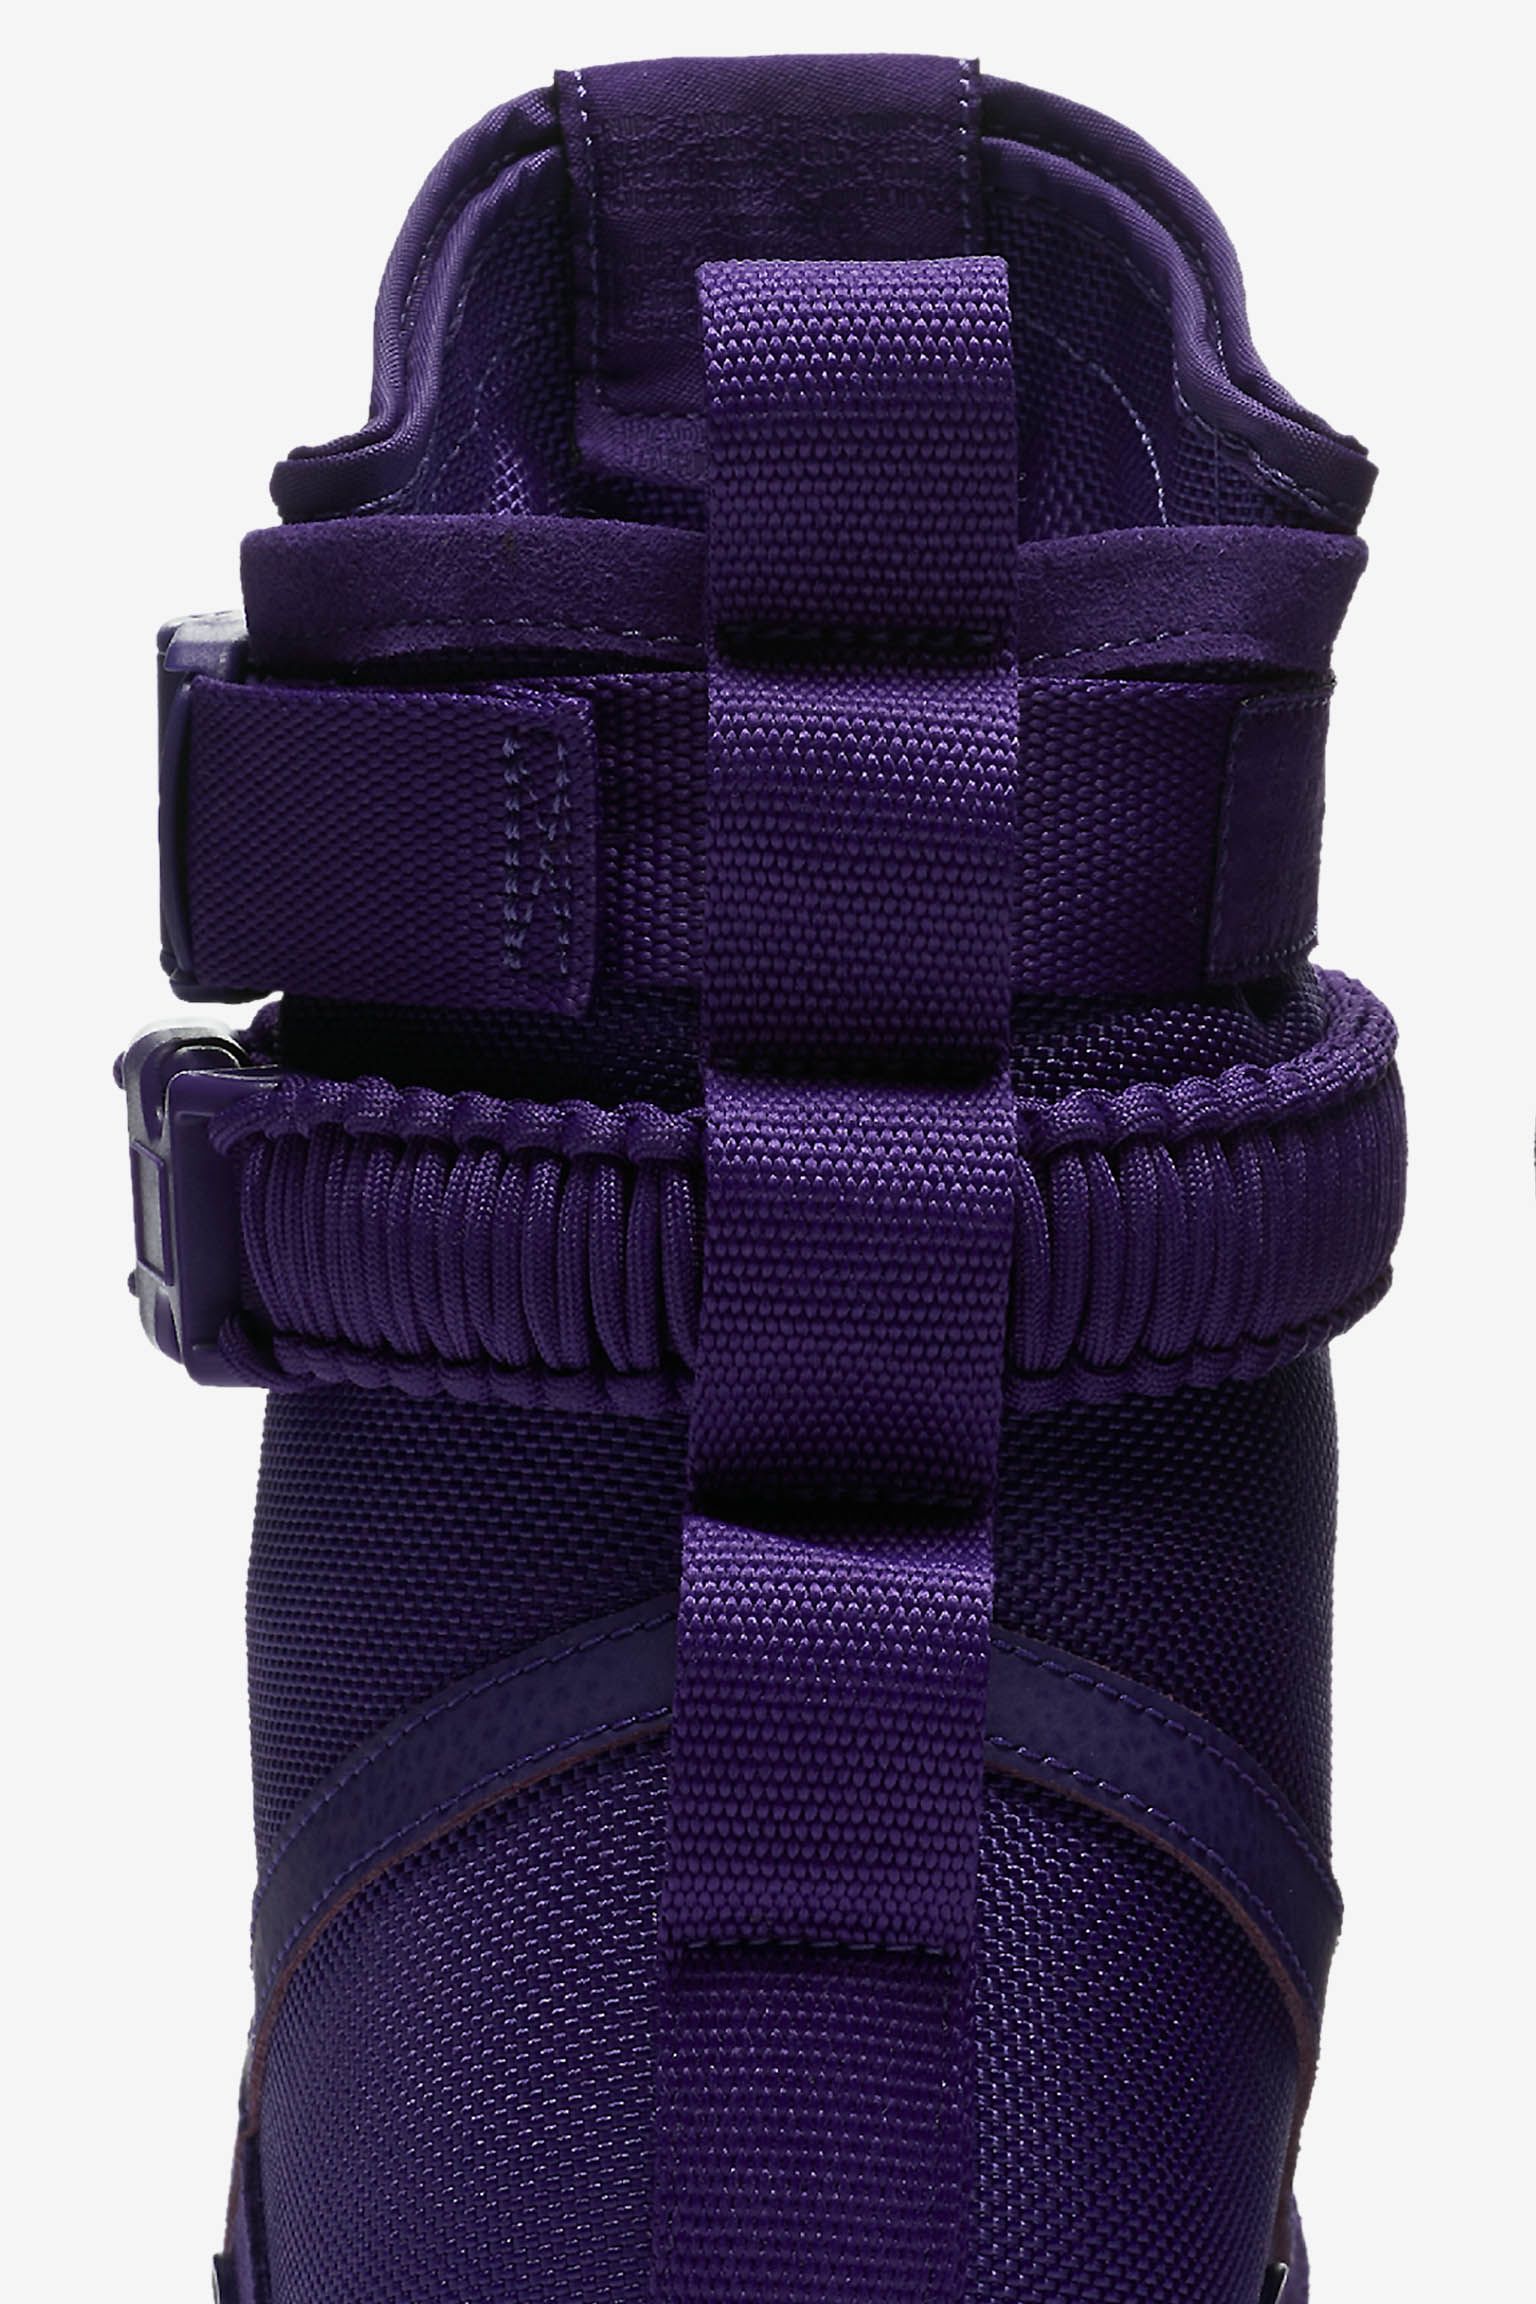 Nike SF AF-1 'Court Purple' Release Date. Nike SNKRS